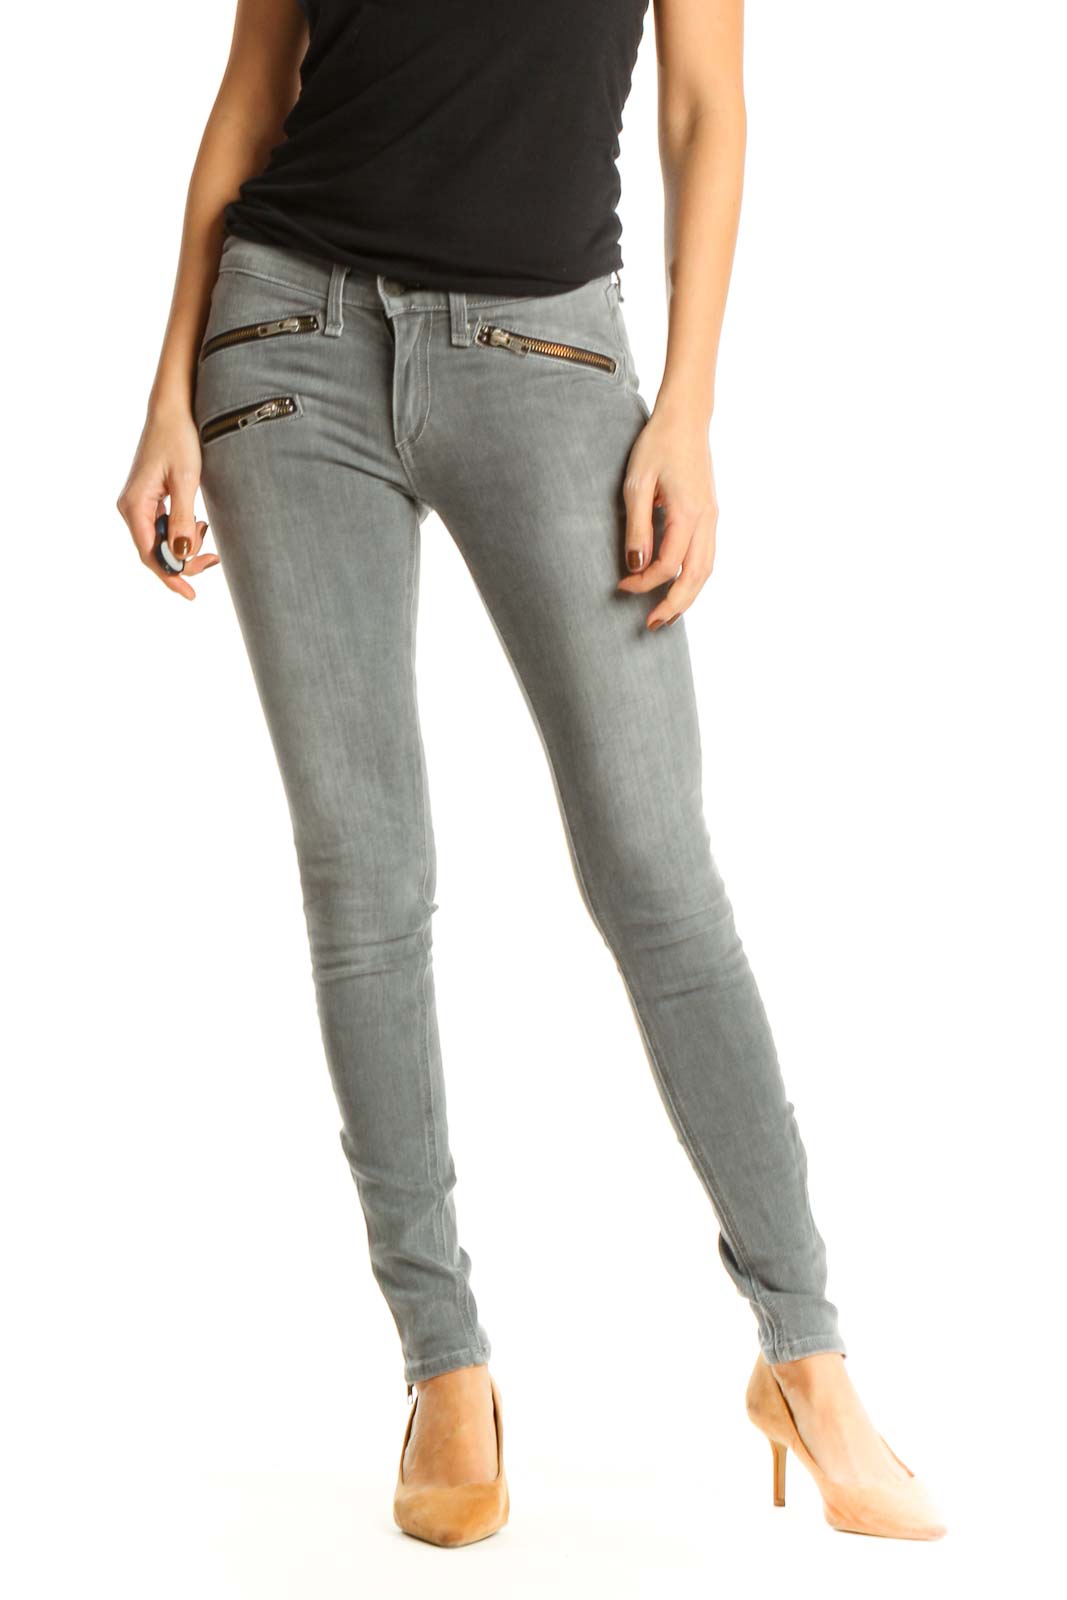 Gray Skinny Jeans Front